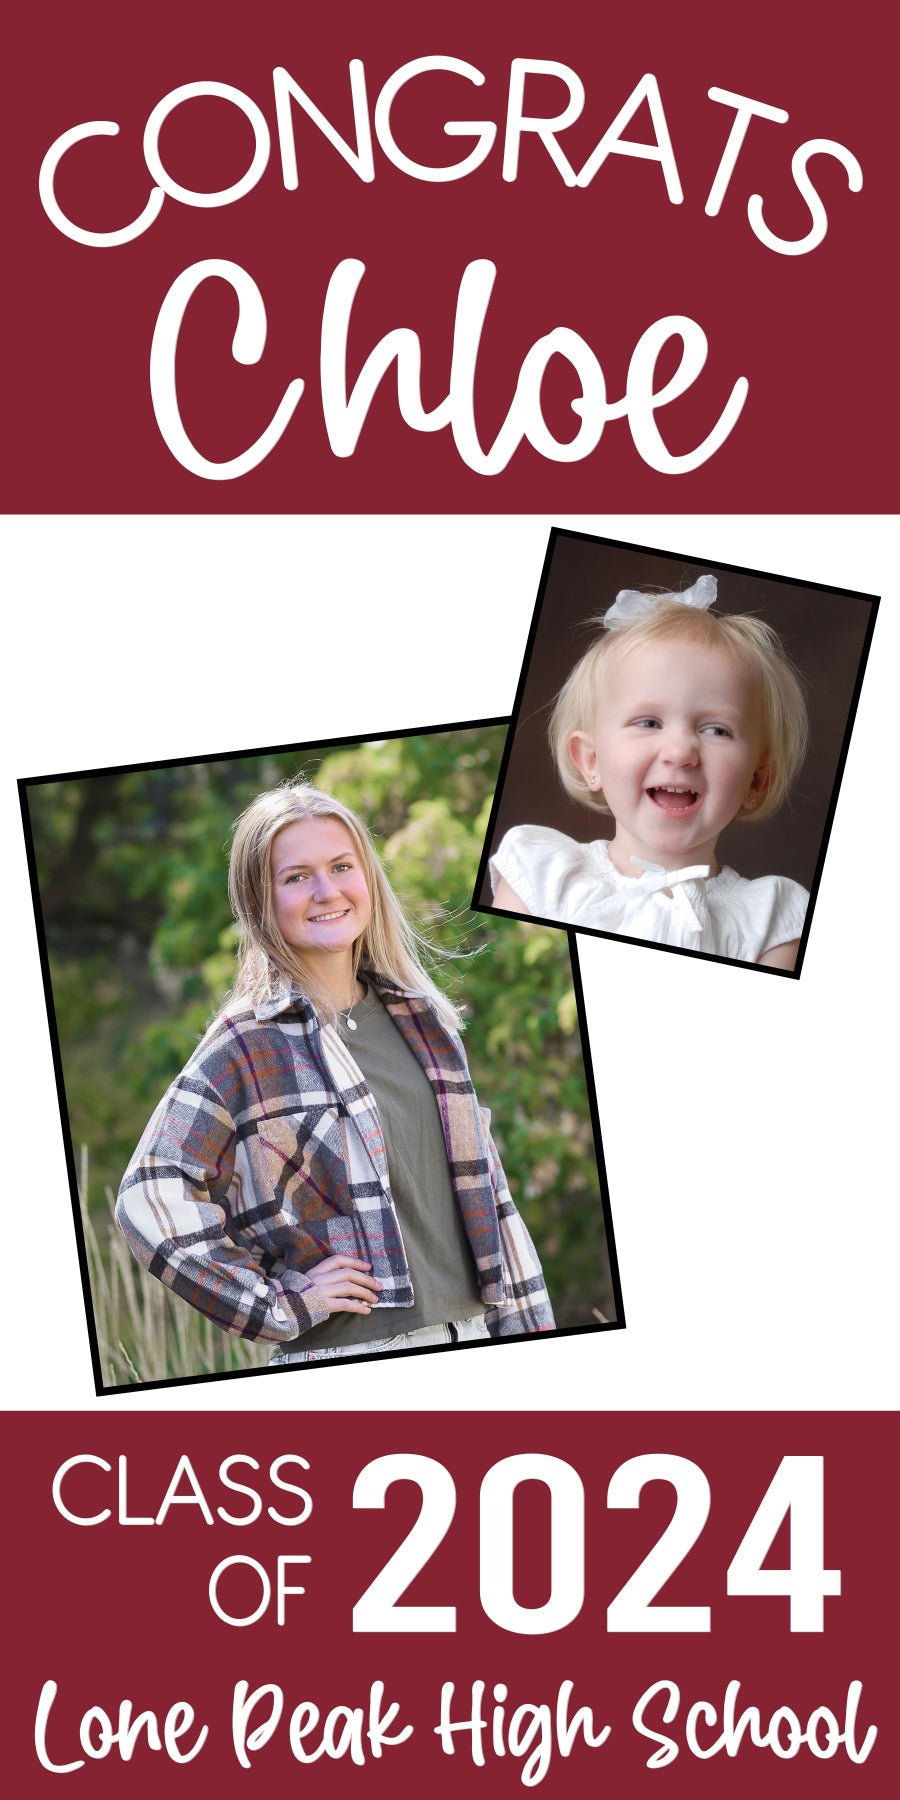 Graduation Banner - Vertical - 2x4 - Grad with Baby Picture